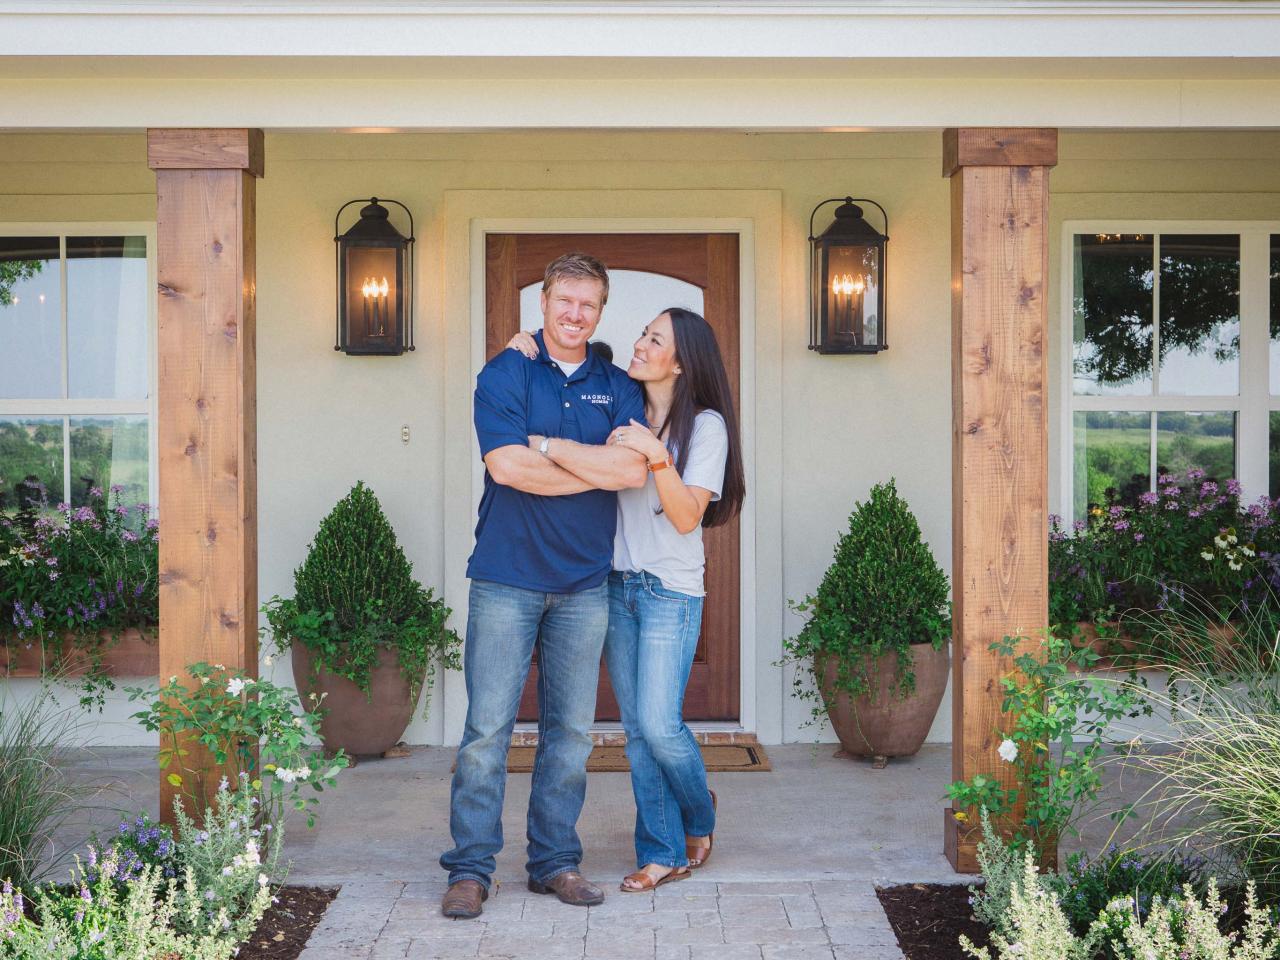 Chip and Joanna Gaines pose in front of a house in Fixer Upper 